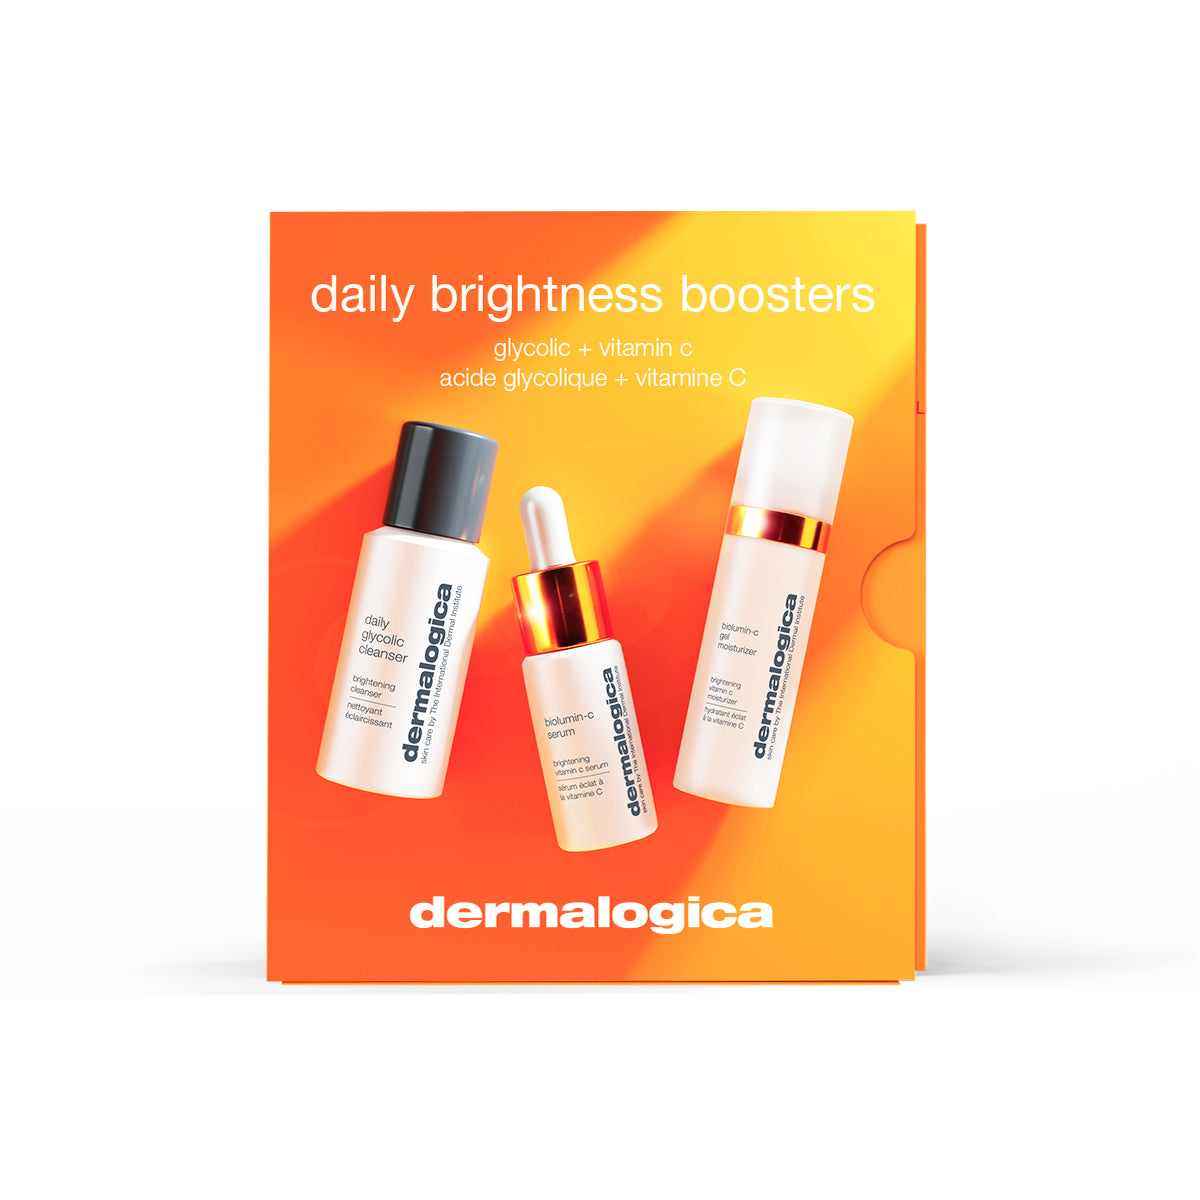 daily brightness boosters kit